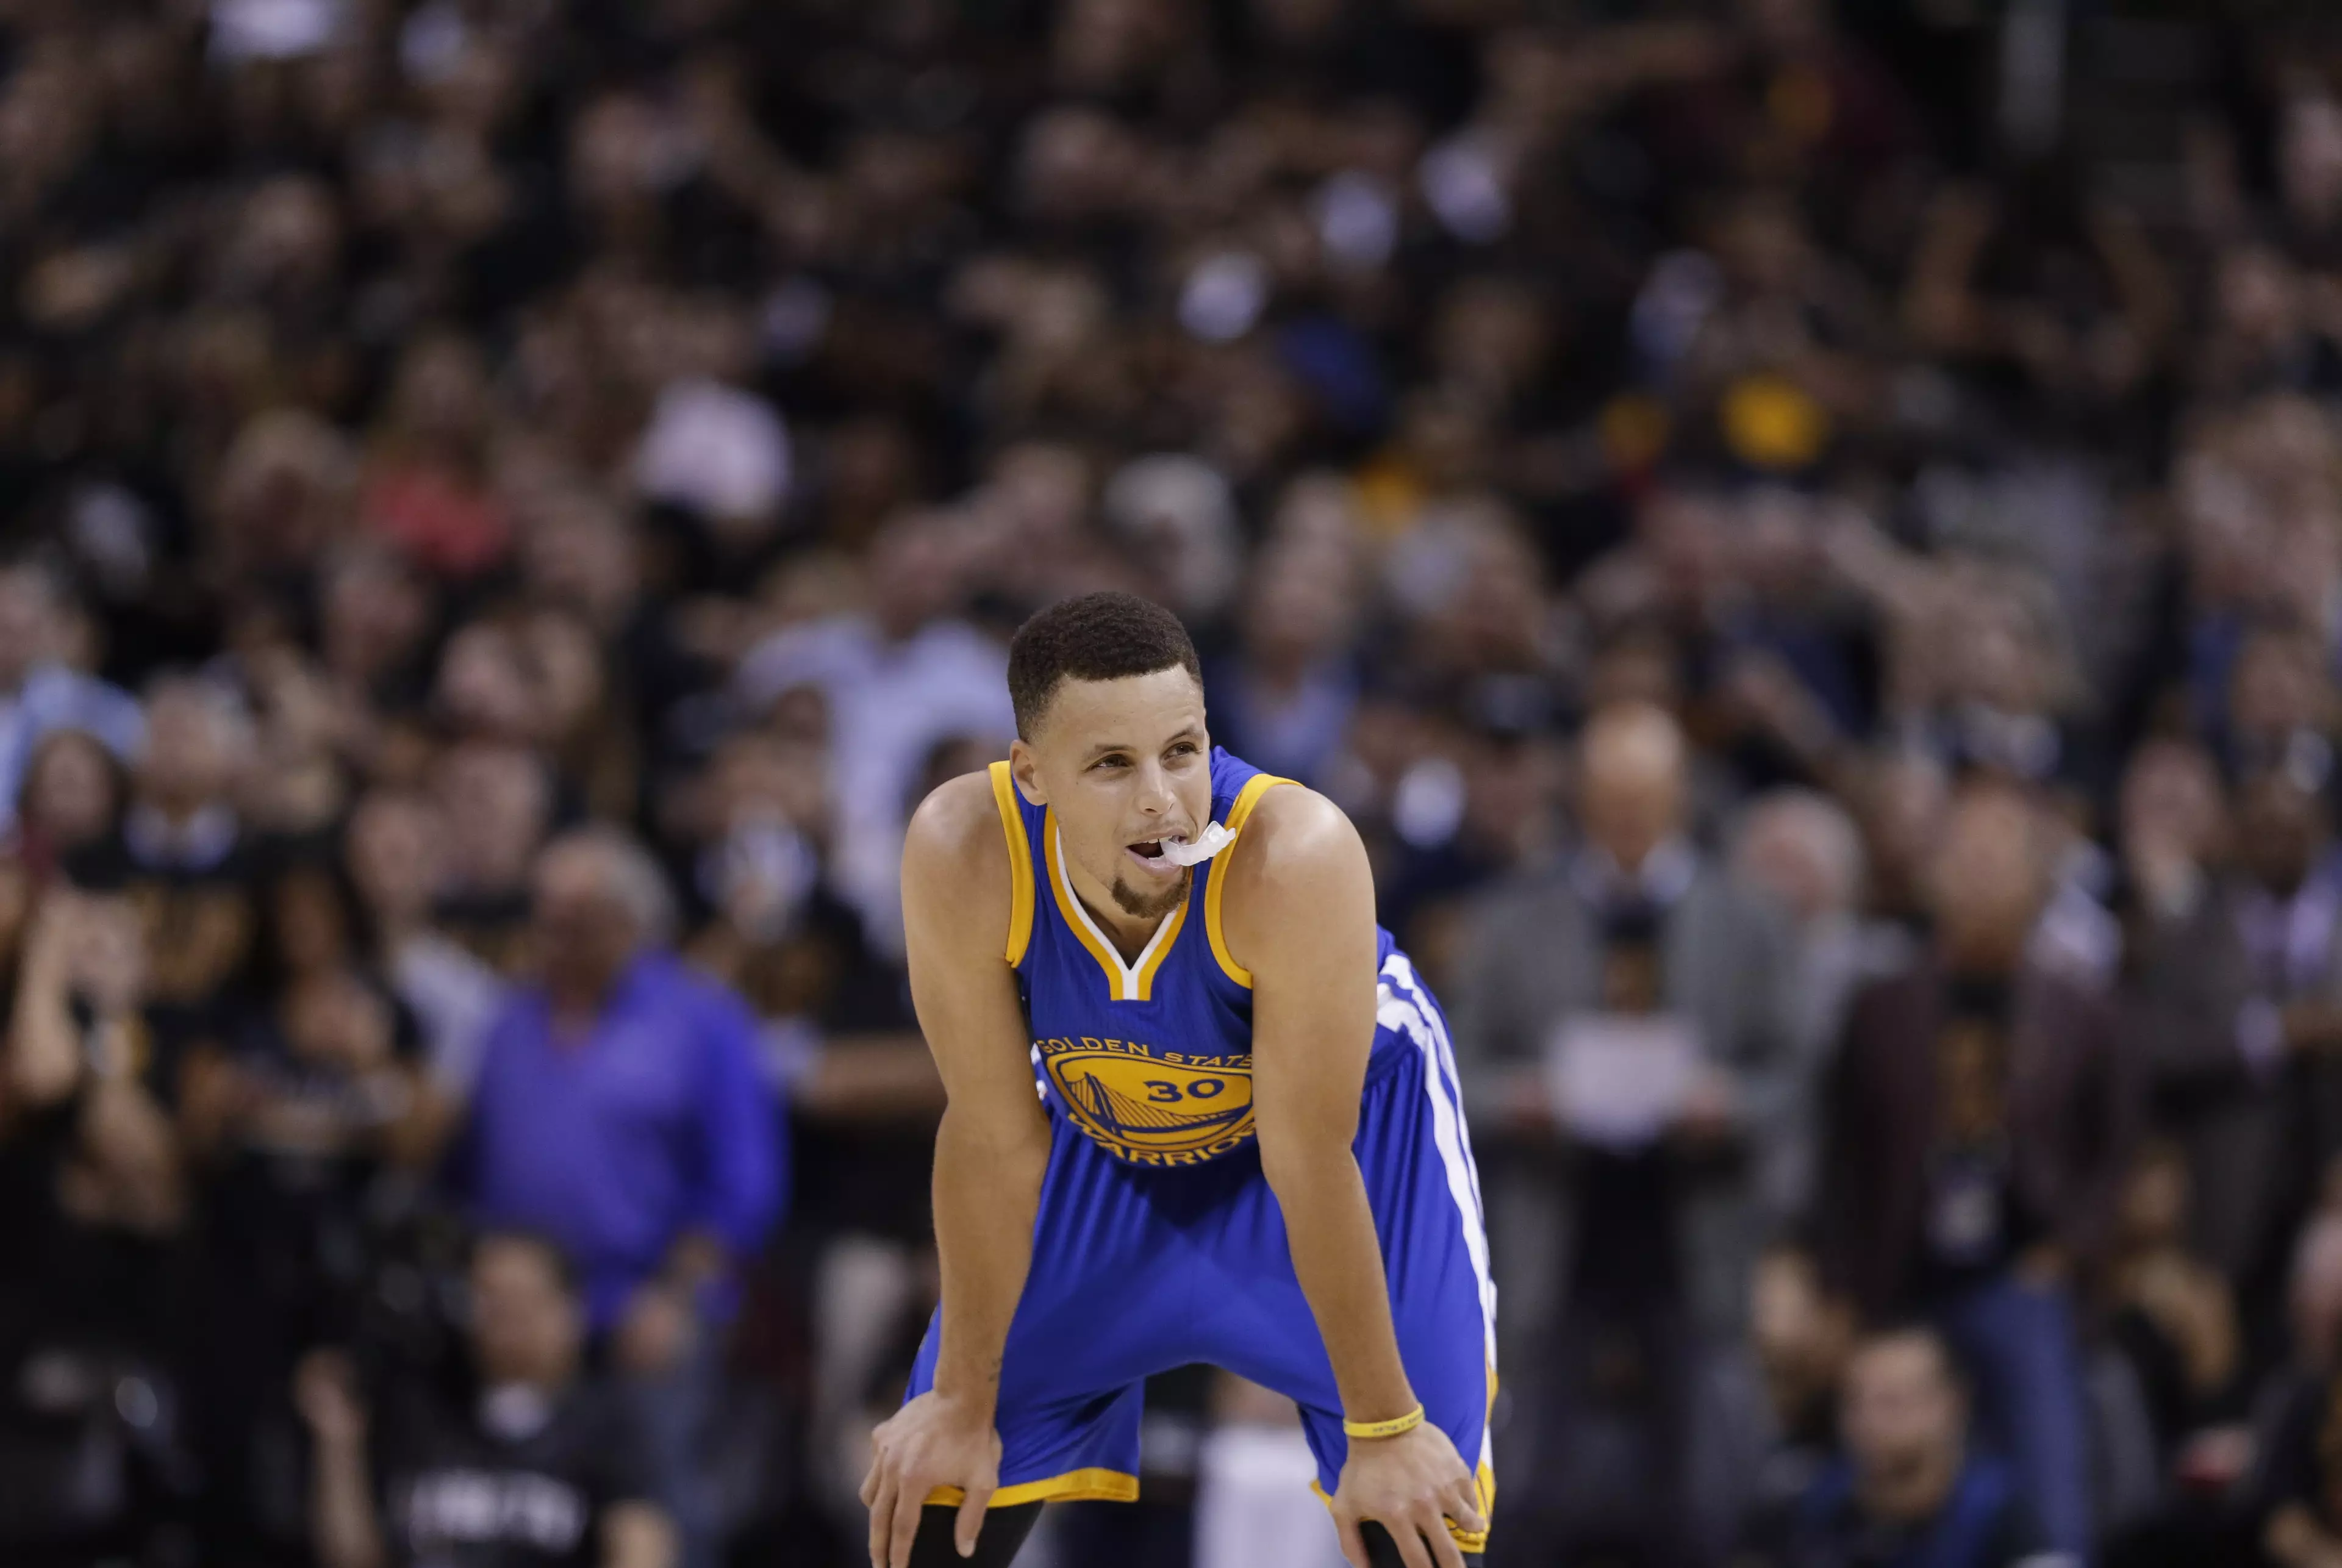 WATCH: Stephen Curry Launches Mouthpiece At Fan